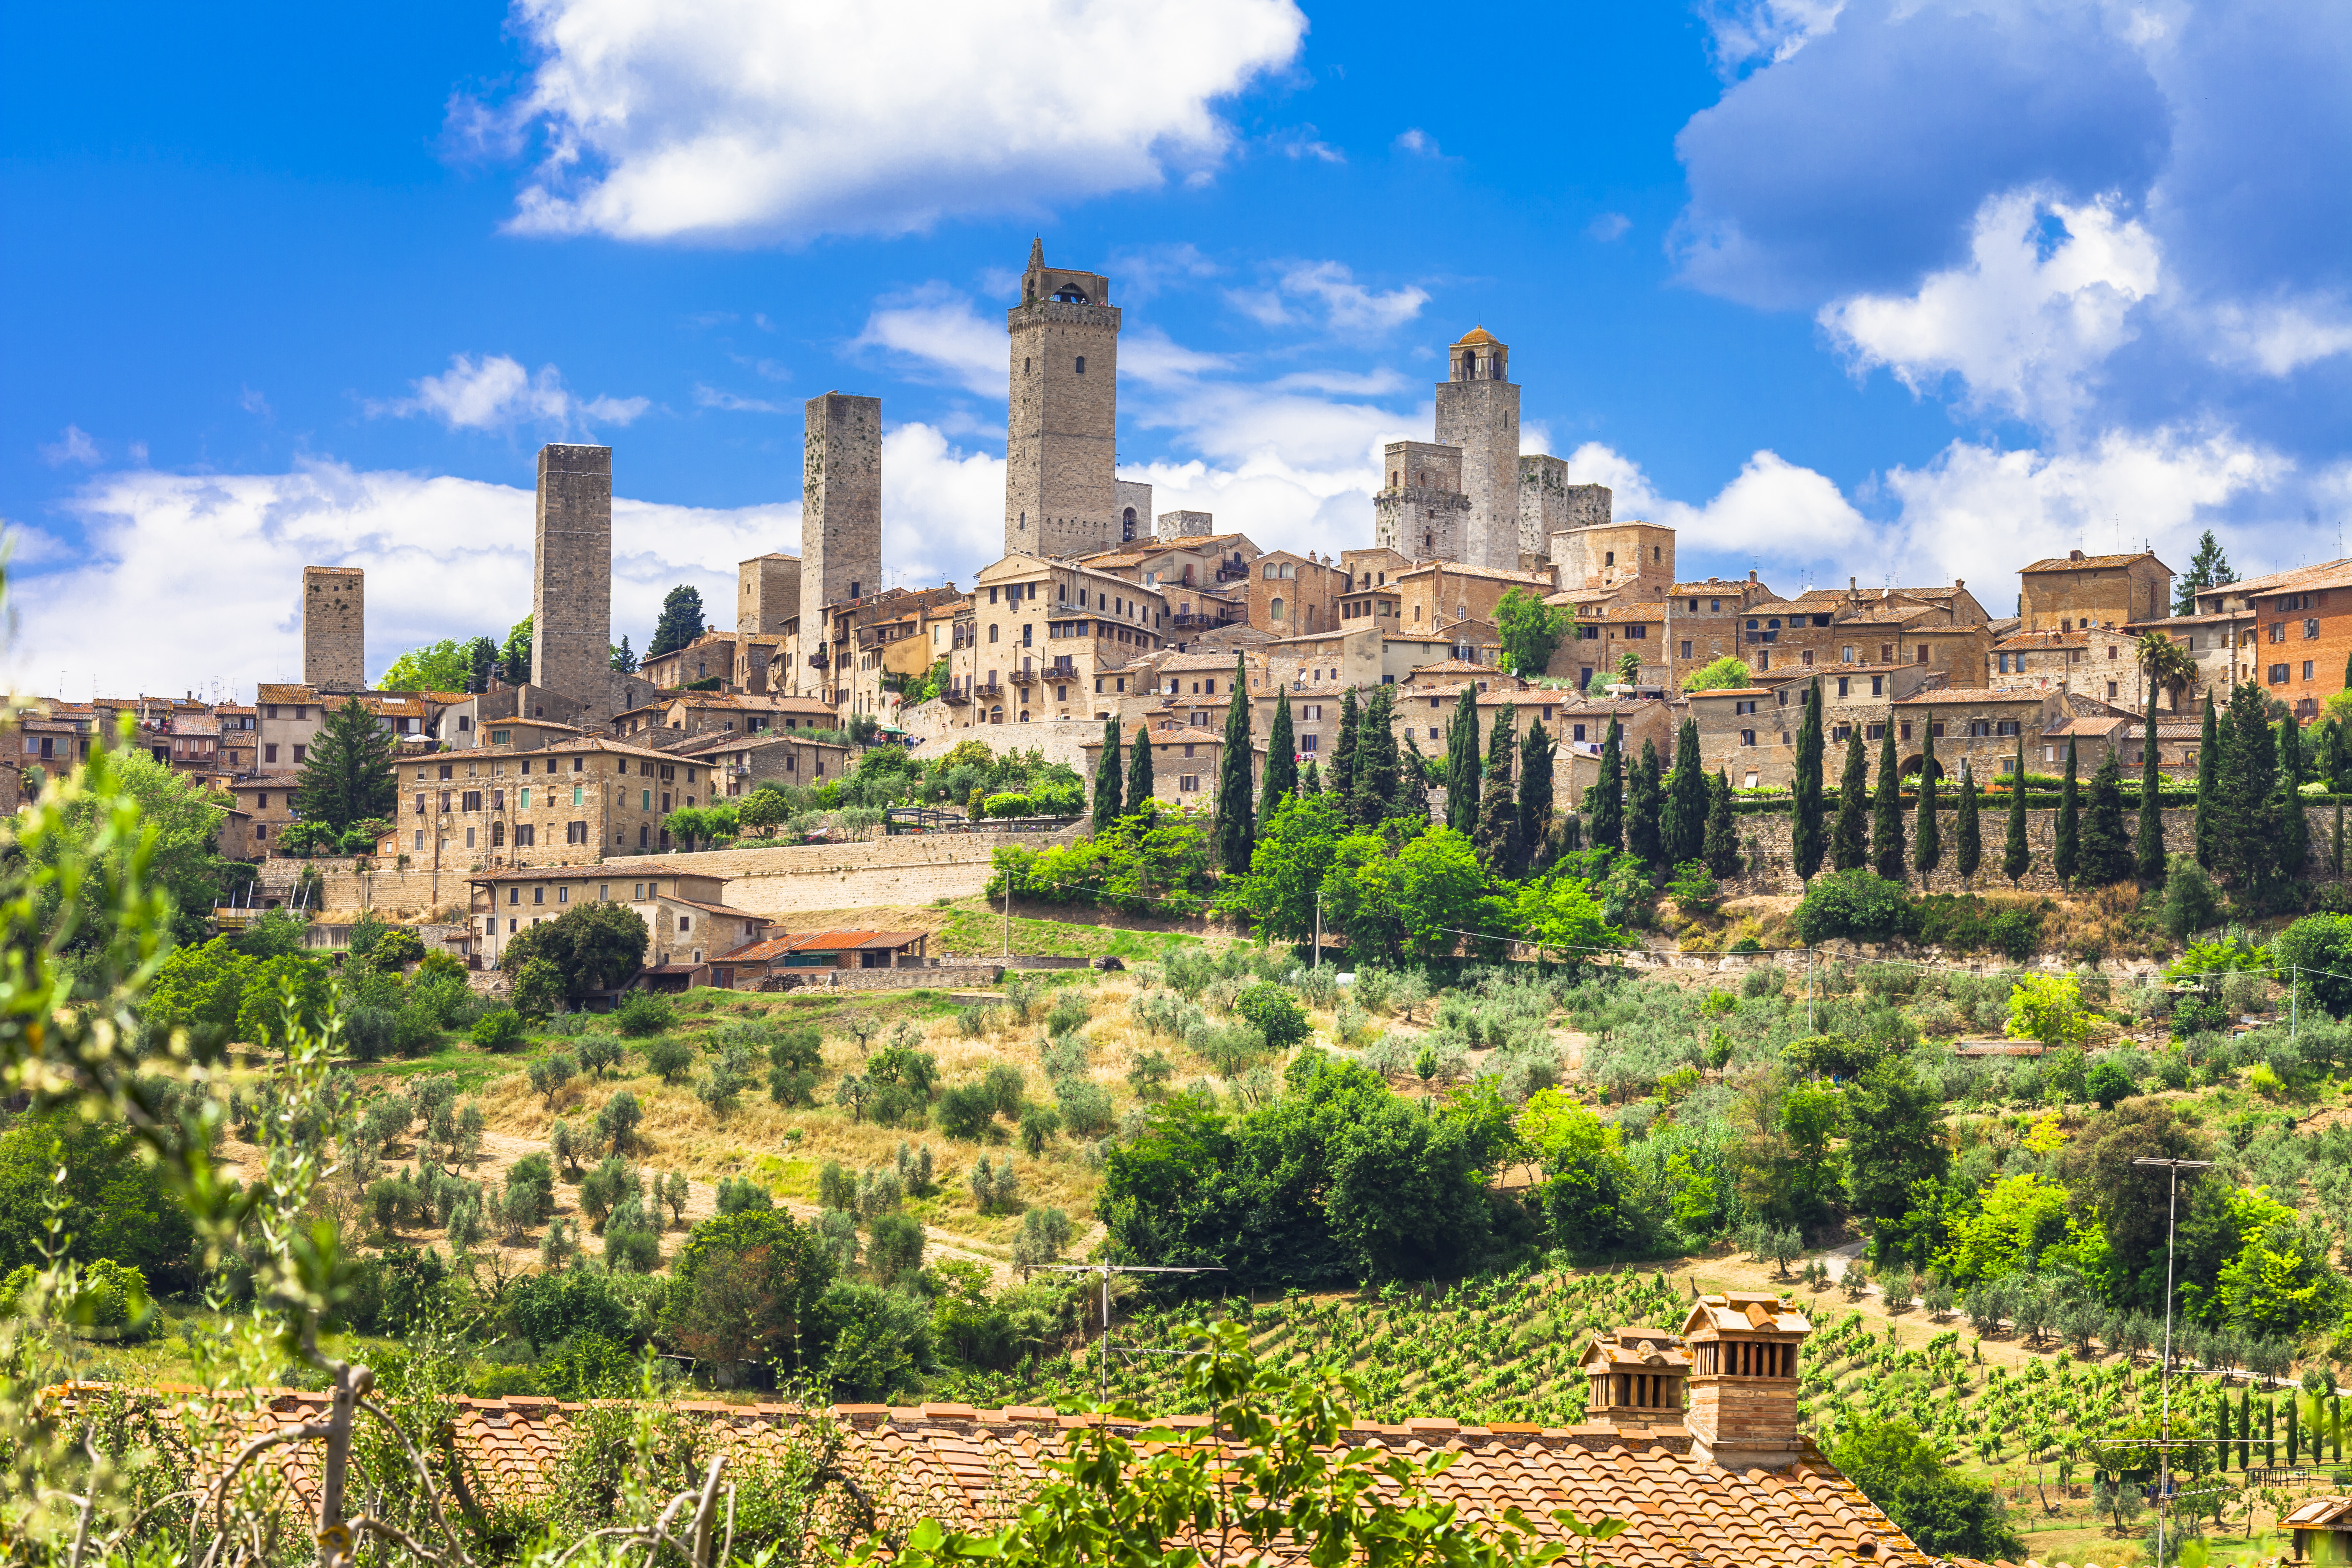 Complete 3 Chapters in a Memory Book While on a Family Vacation in Italy - San Gimignano